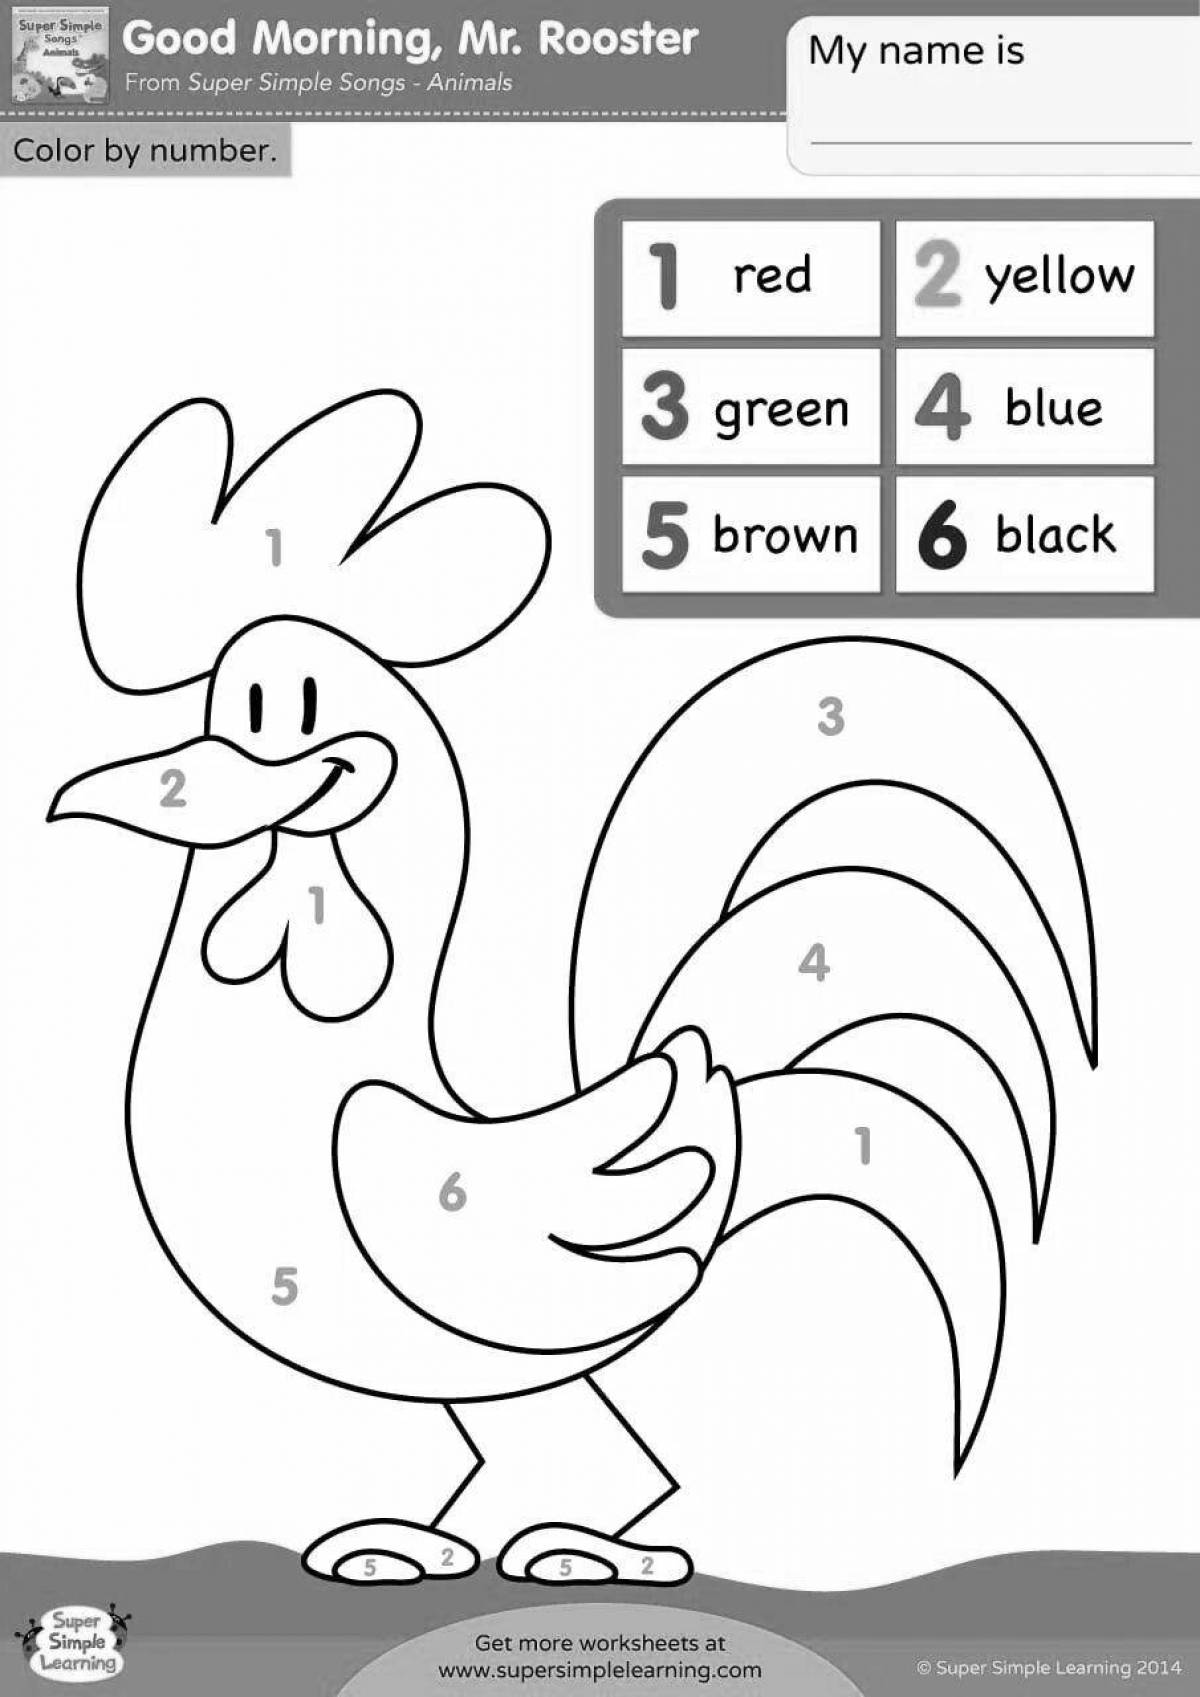 Fancy rooster coloring by numbers